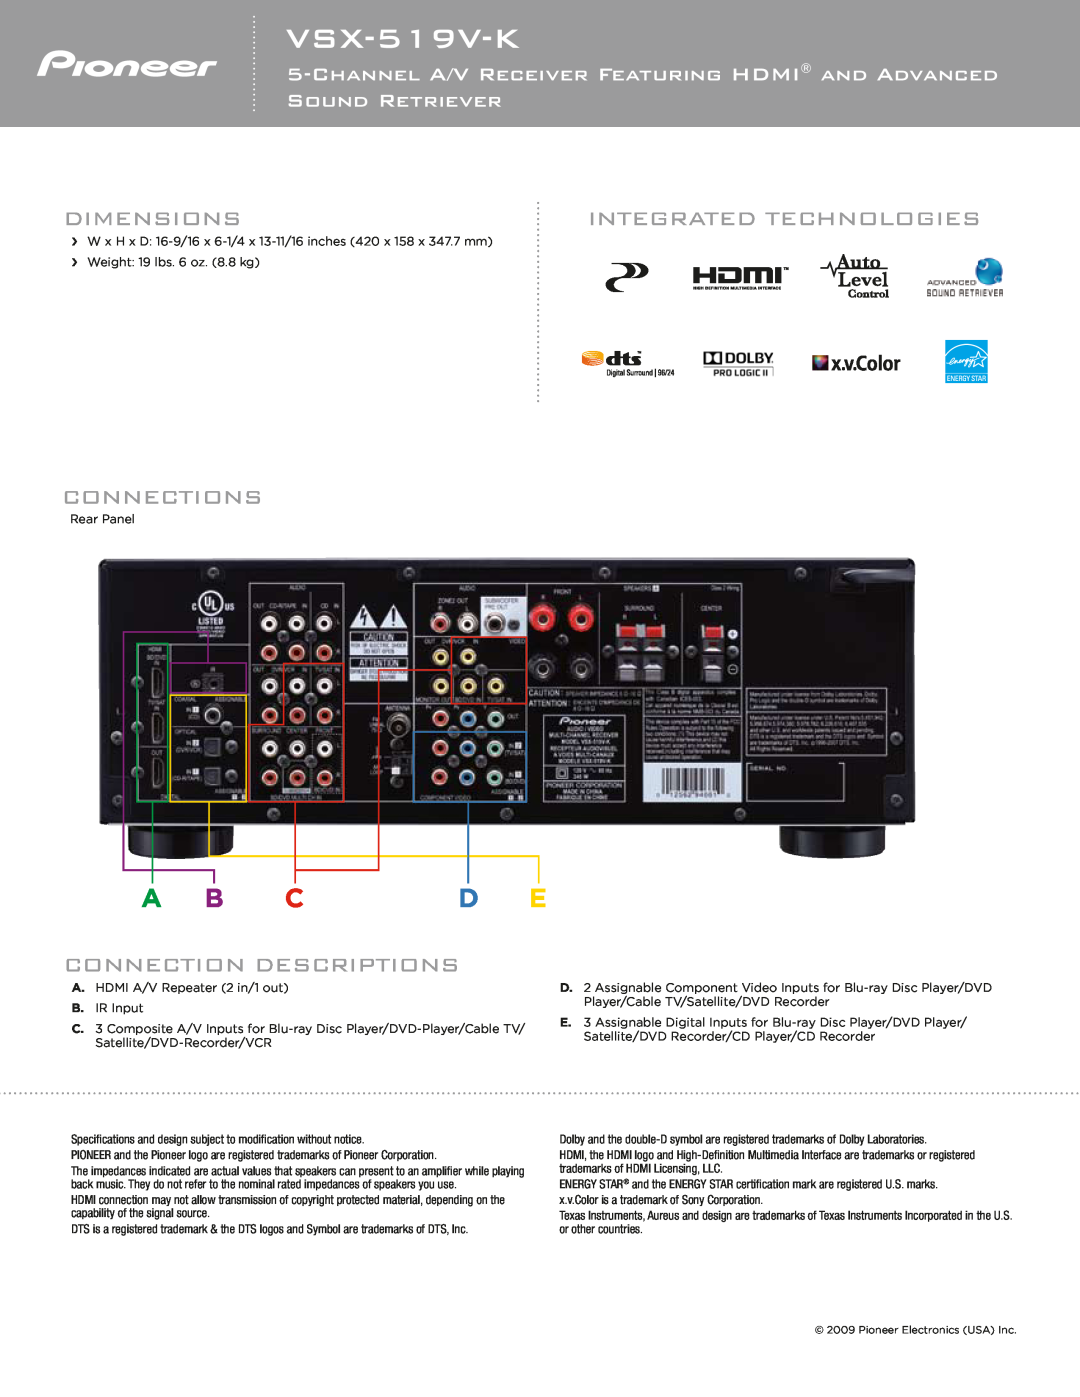 Pioneer VSX-519V-K specifications Dimensions, Integrated Technologies, Connections, Connection Descriptions, A B C D E 